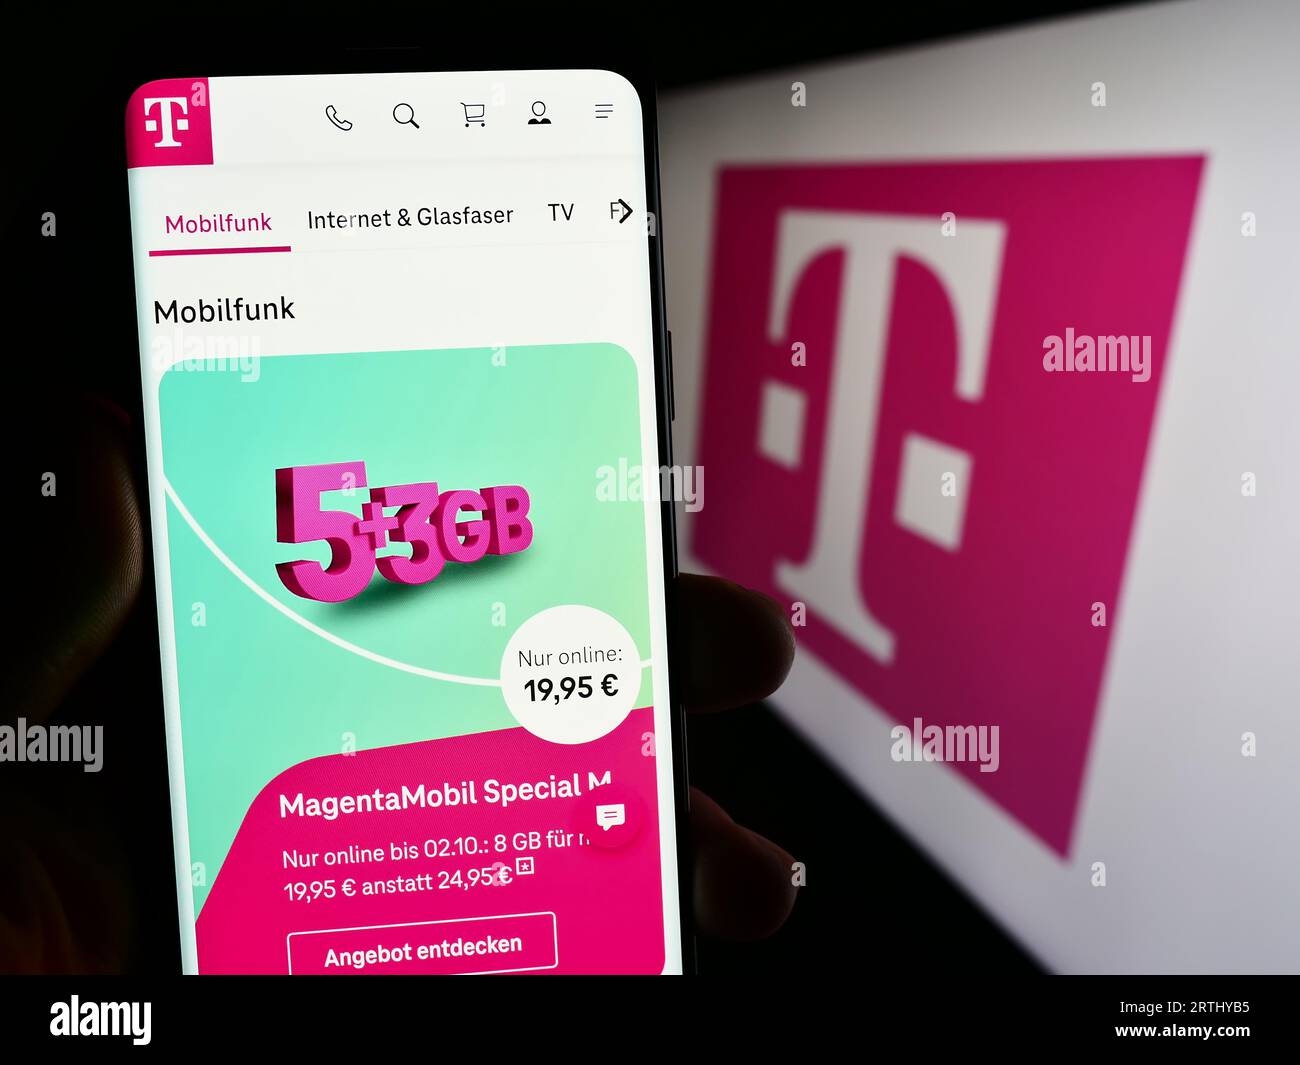 Person holding mobile phone with web page of telecommunications company Deutsche Telekom AG on screen with logo. Focus on center of phone display. Stock Photo